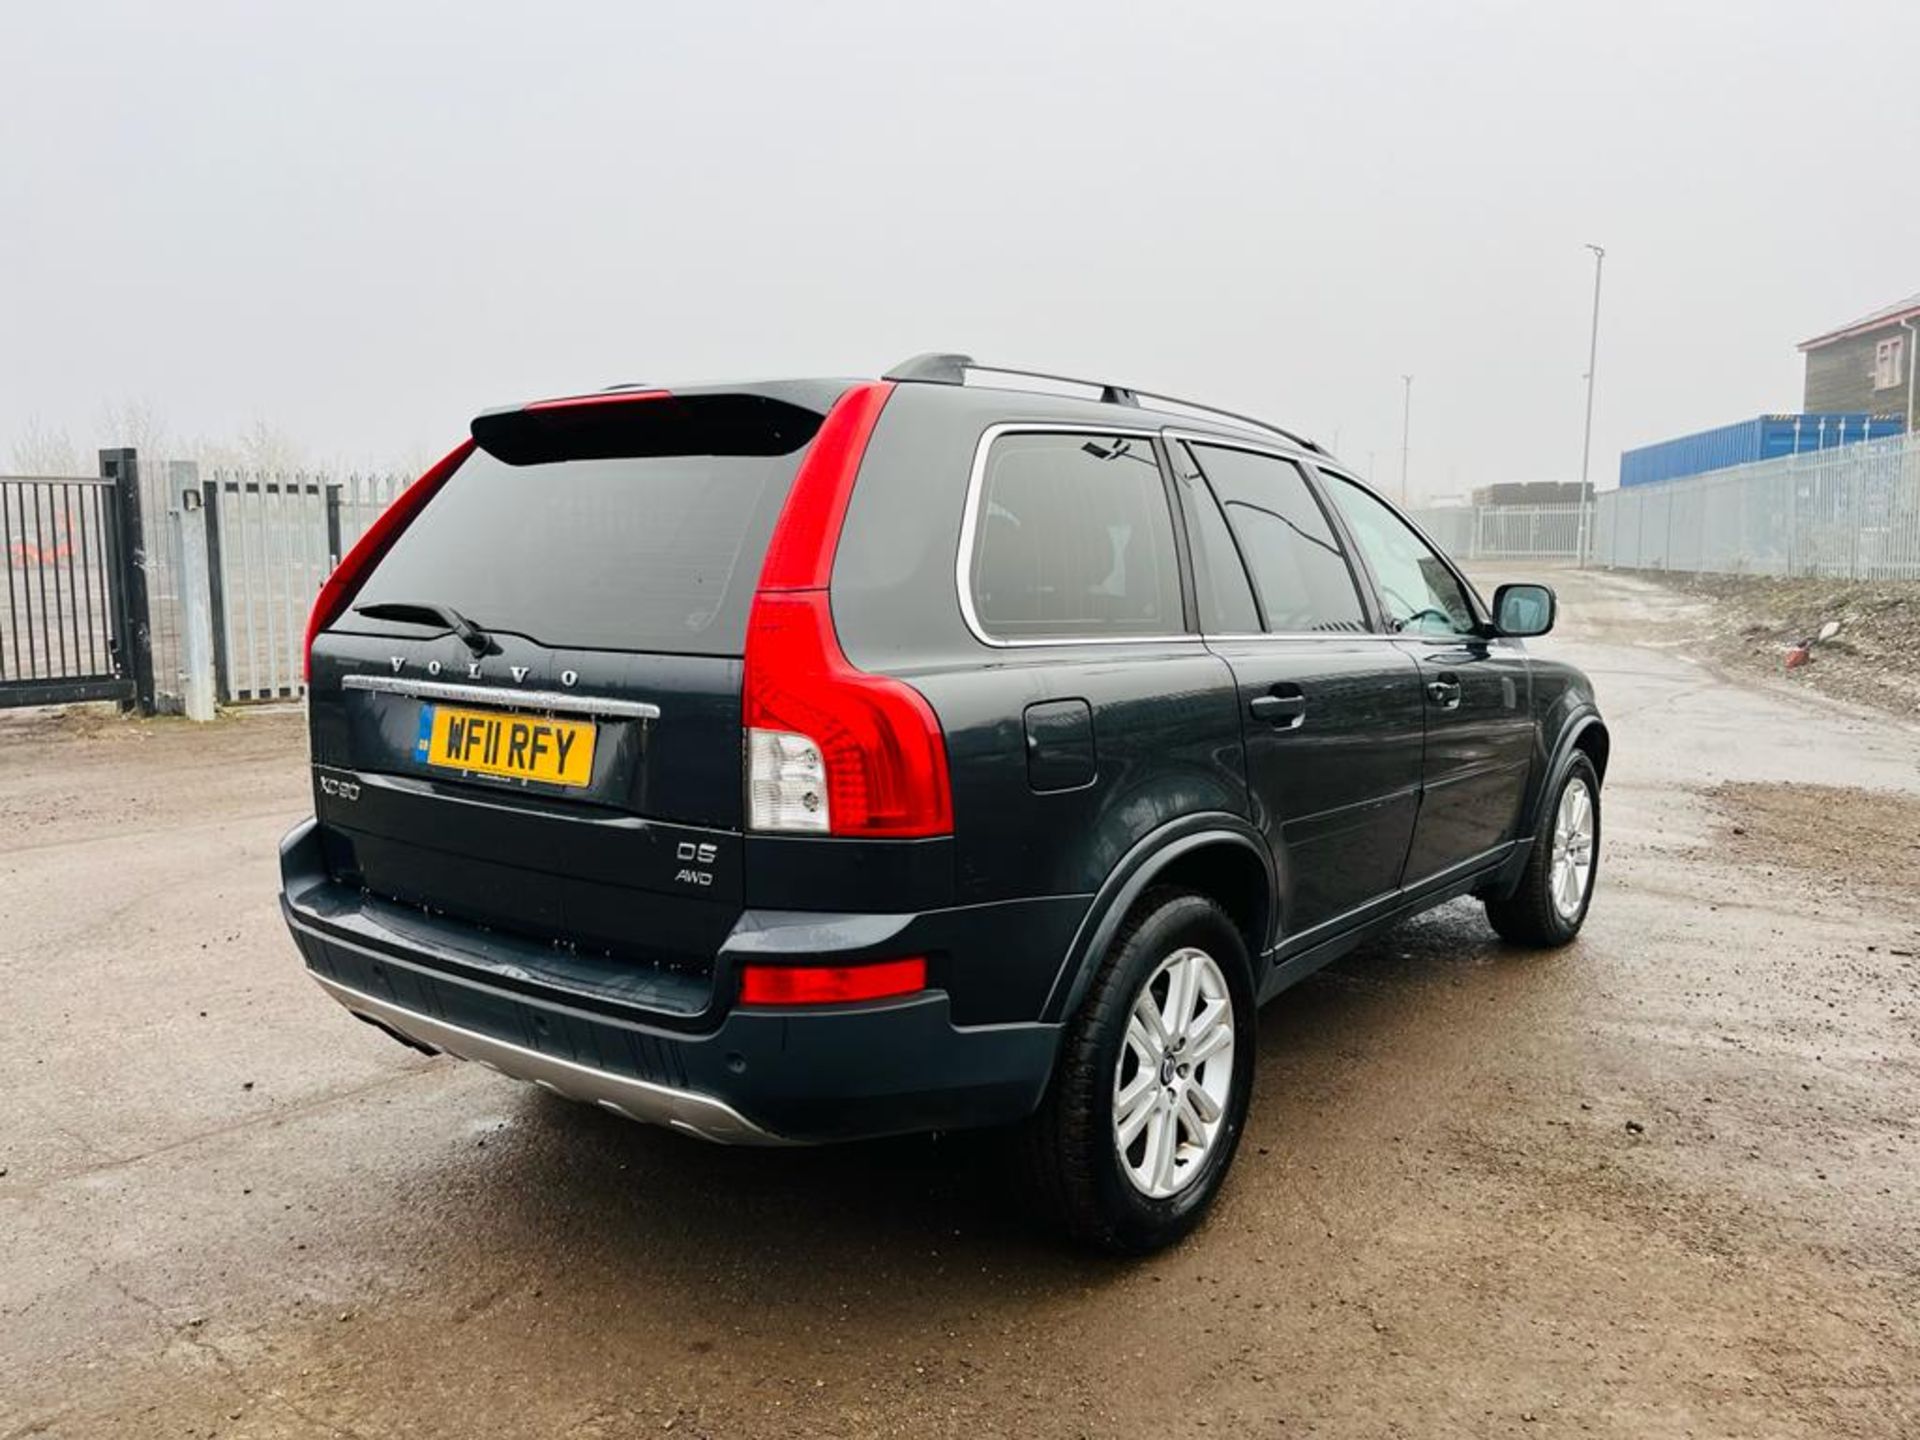 Volvo XC90 2.4 D5 200 SE G/T 4WD 2011 '11 Reg' A/C - No Vat - Ony 121,773 Miles - Image 10 of 35